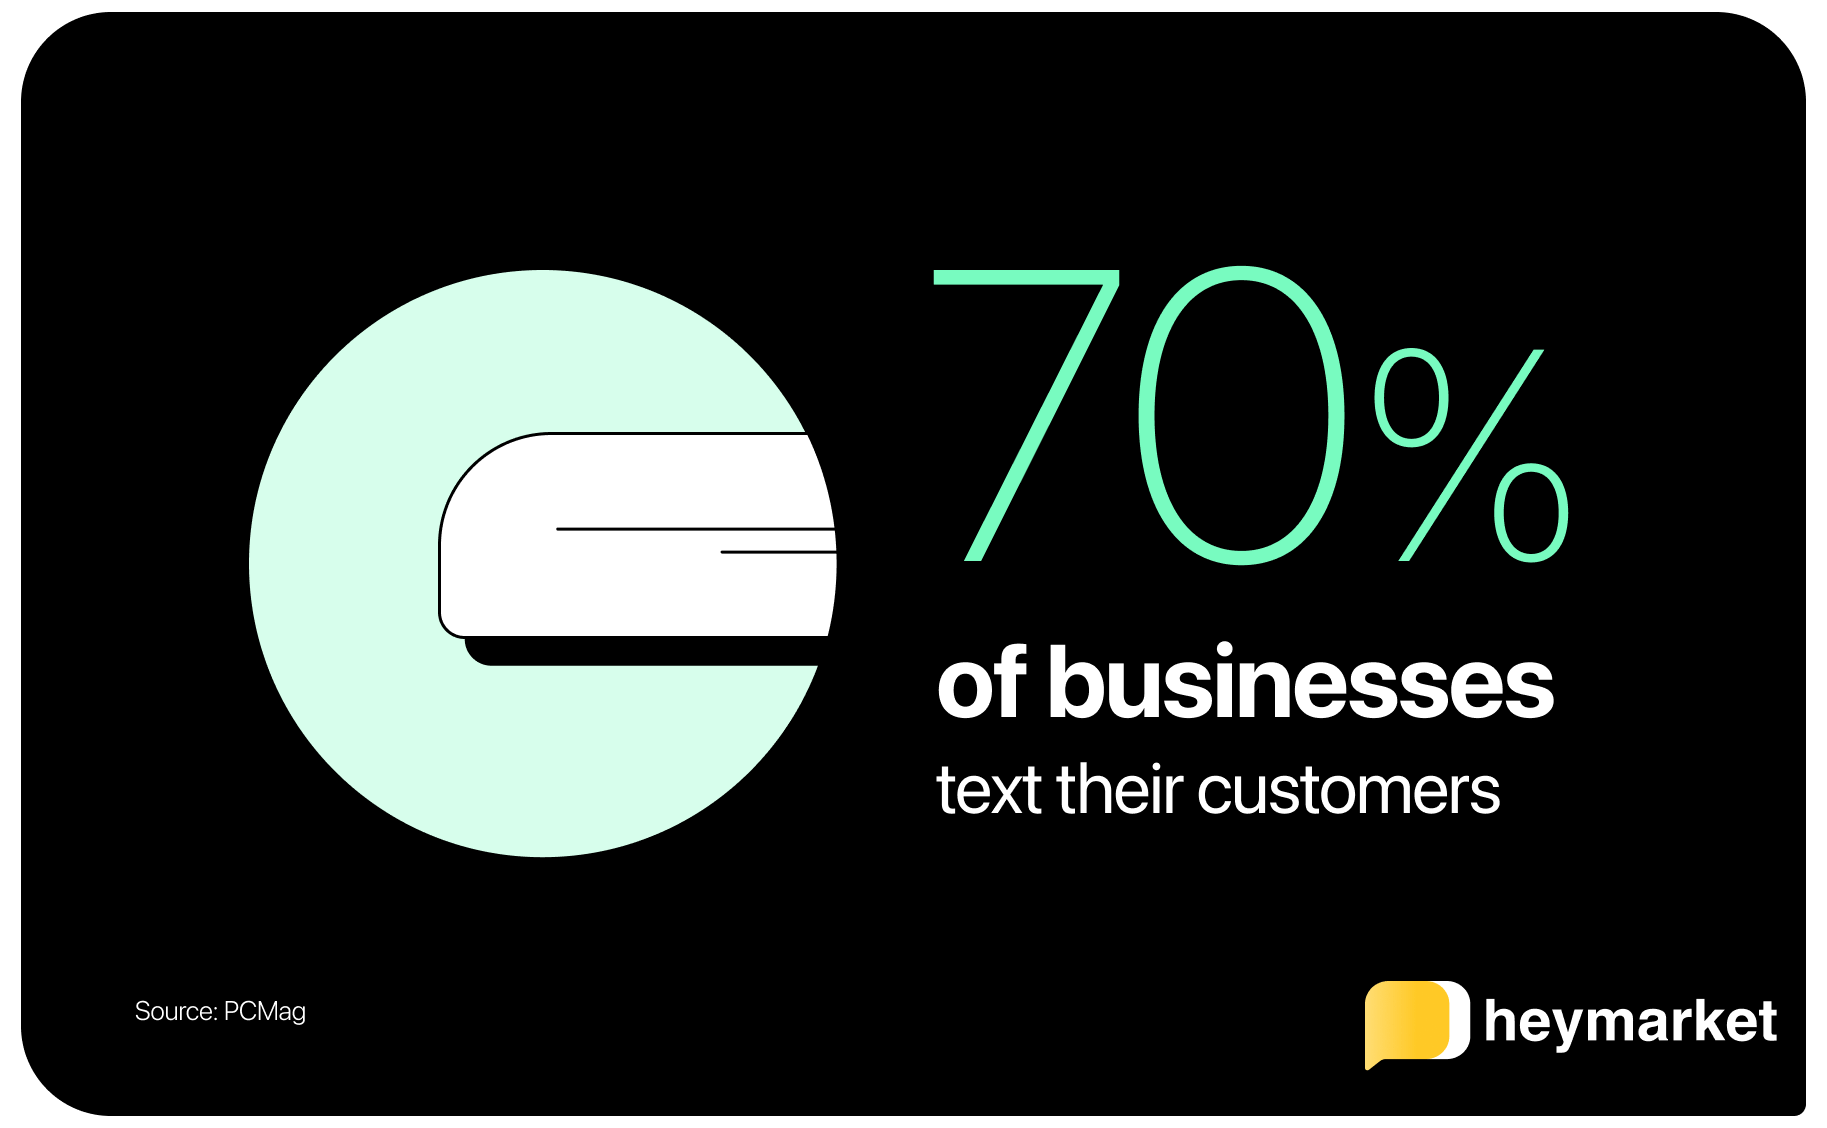 70% of businesses text customers